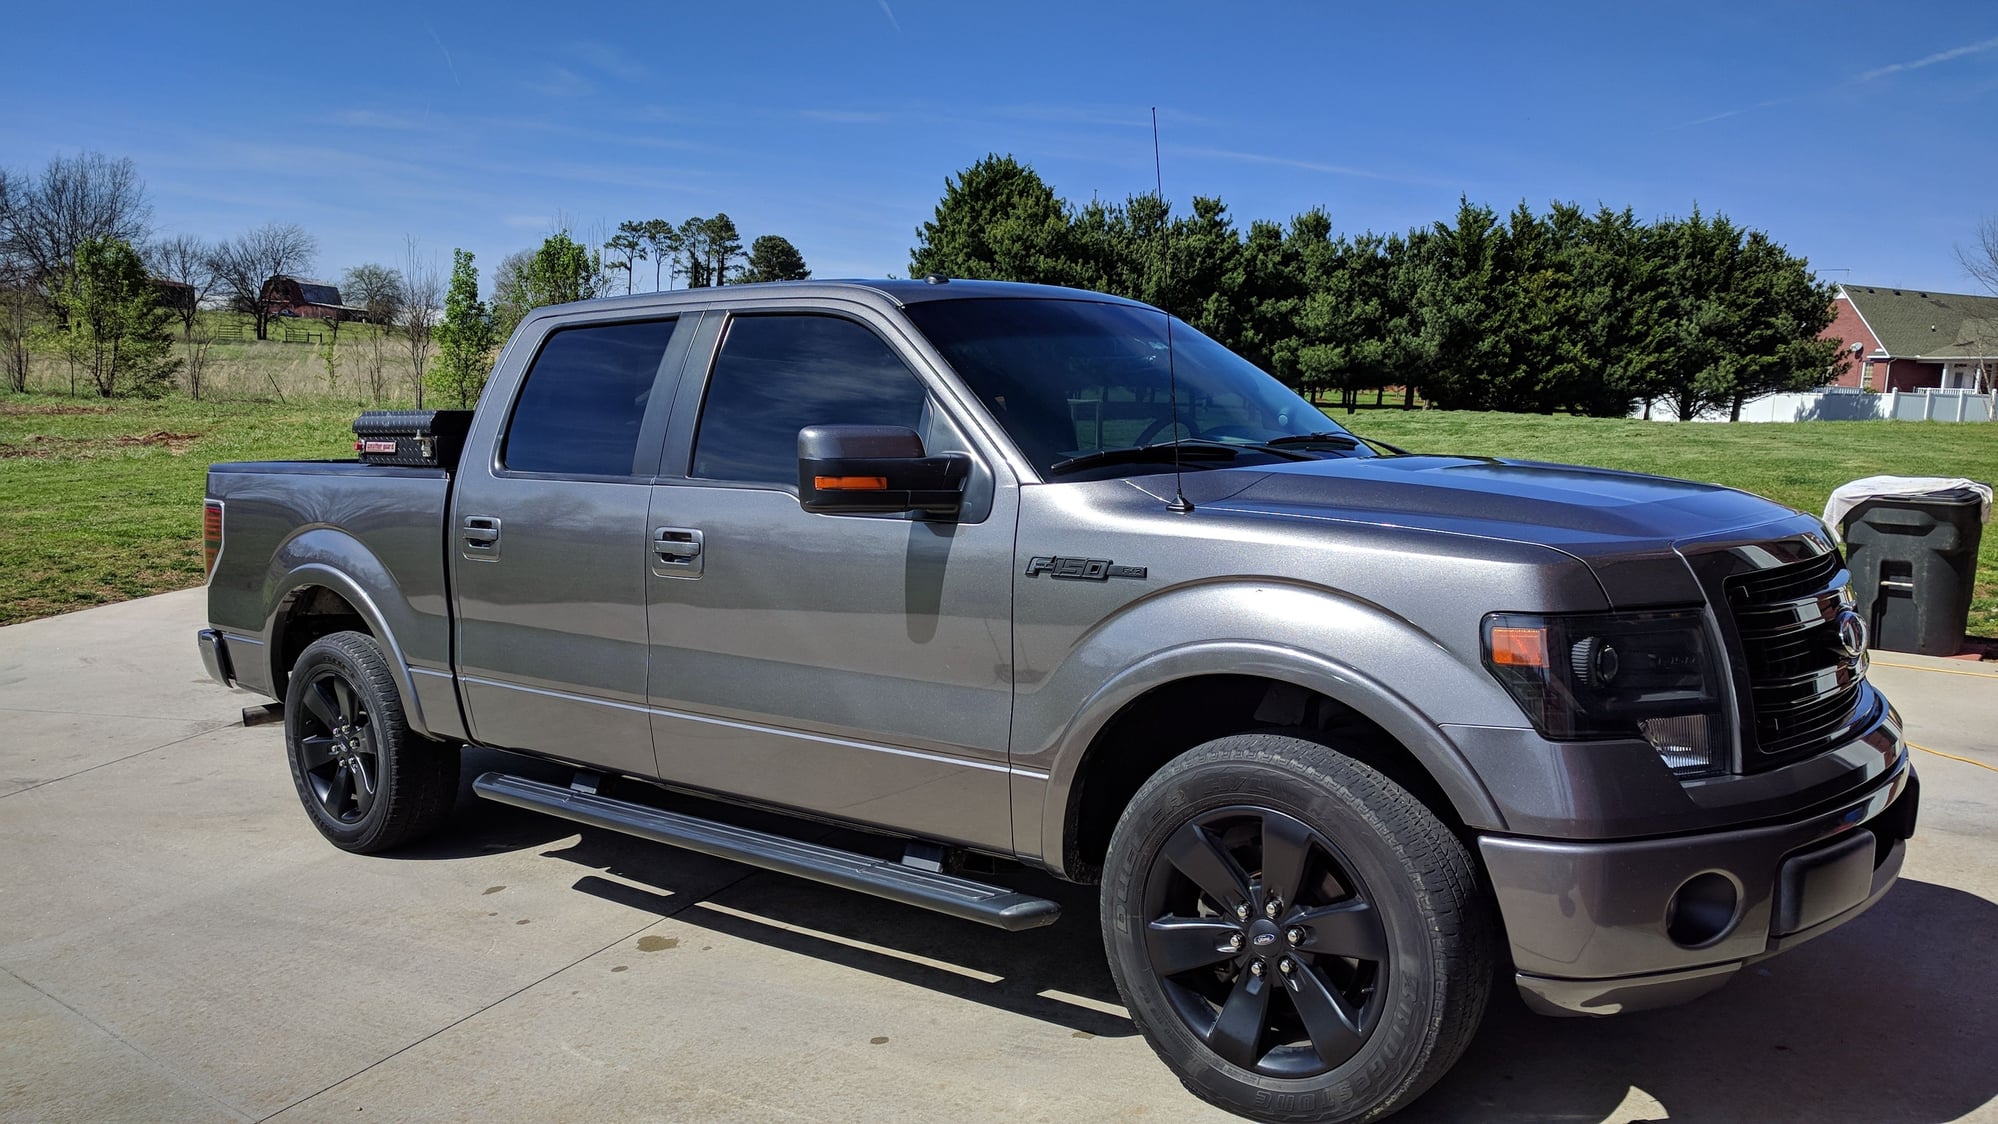 UPgrading my Emblems - Ford F150 Forum - Community of Ford Truck Fans